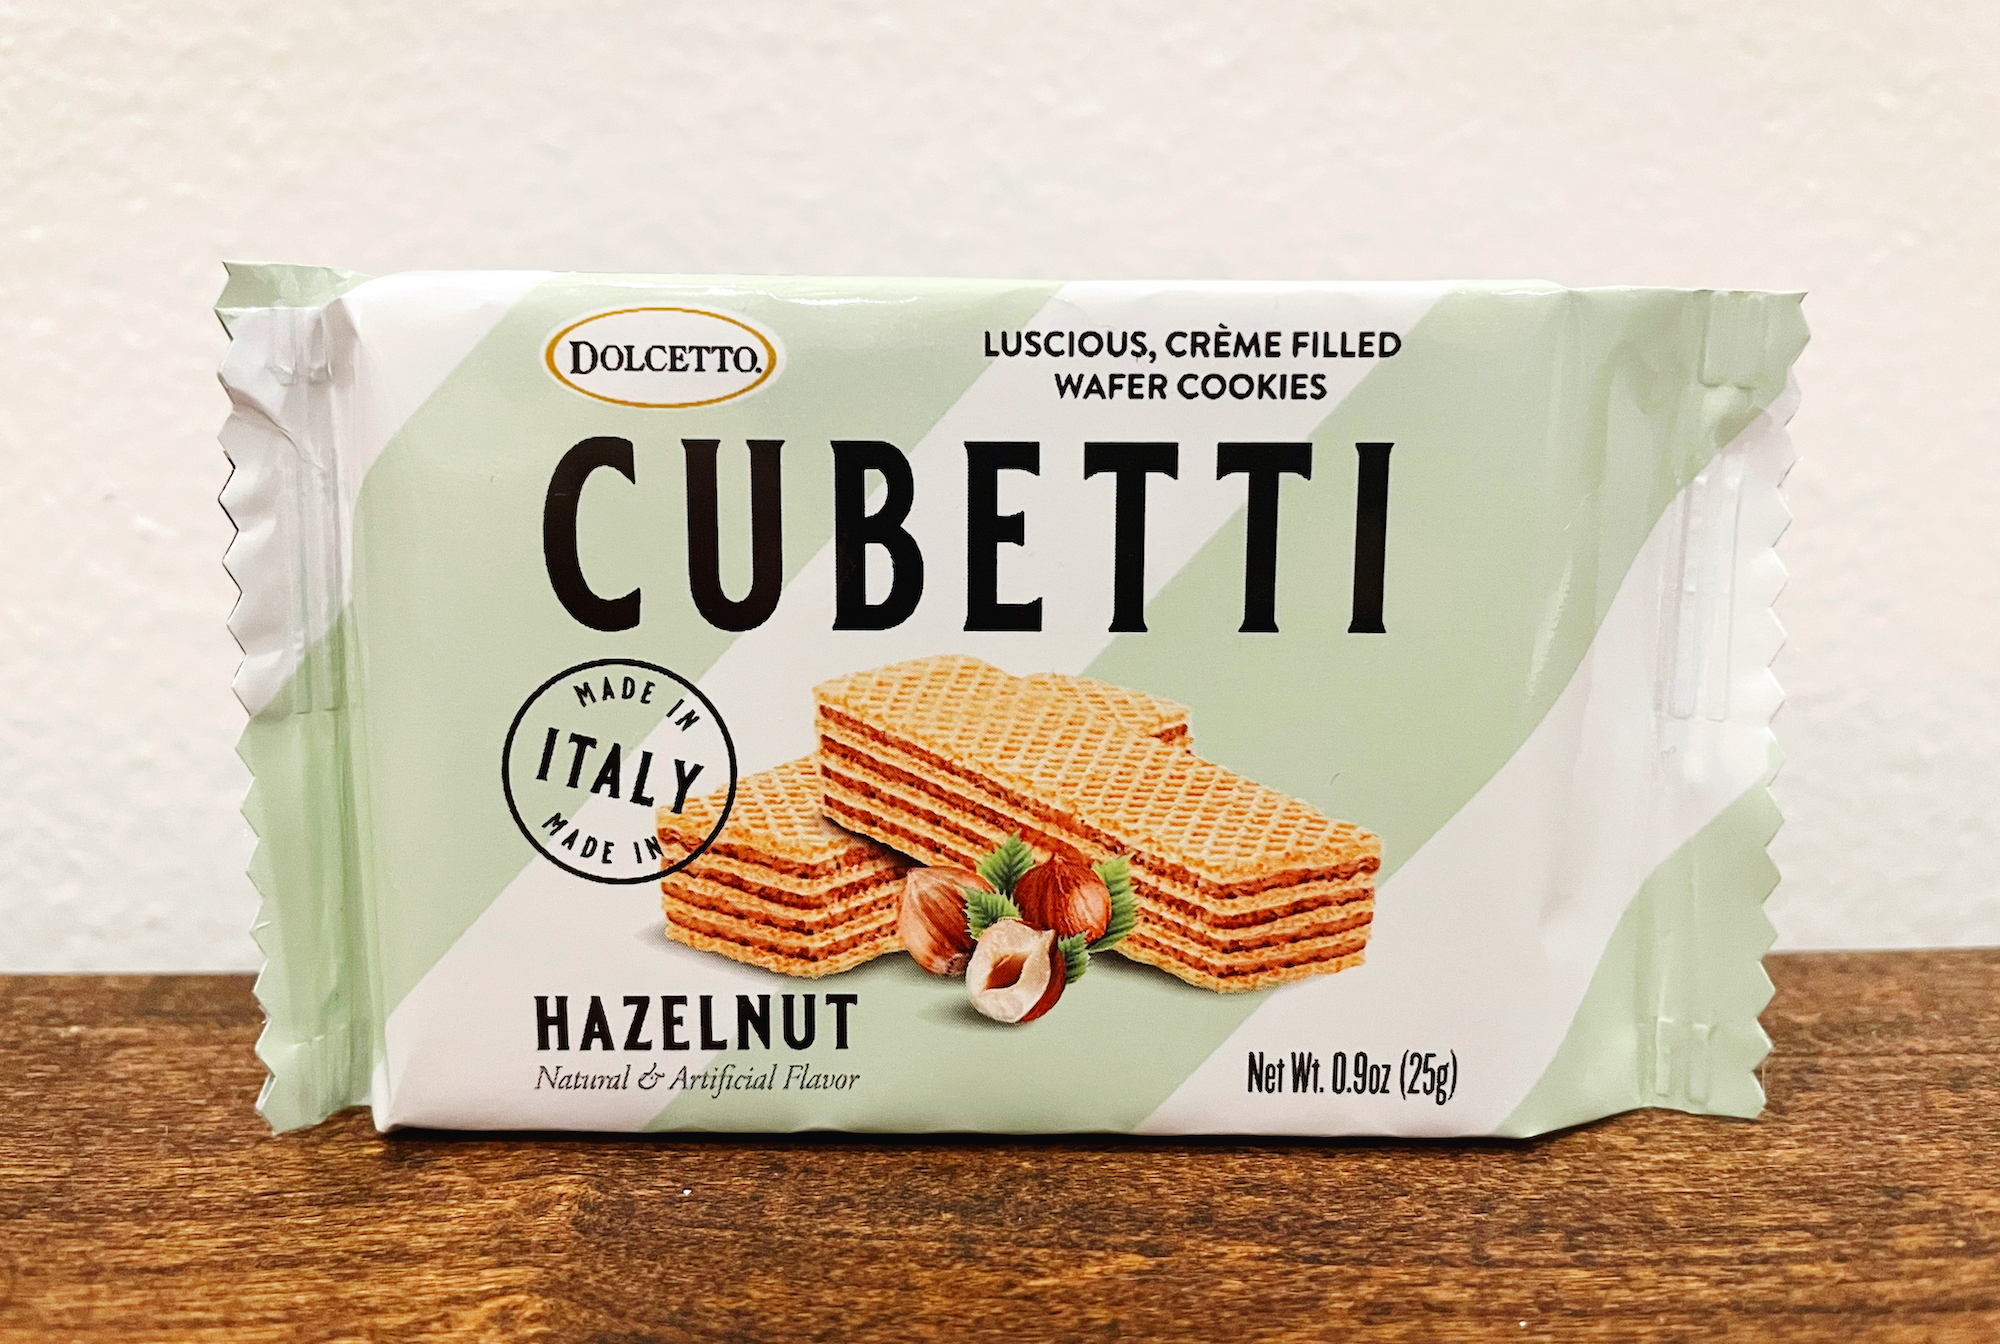 Cubetti Italian snack wafer package on a wooden surface